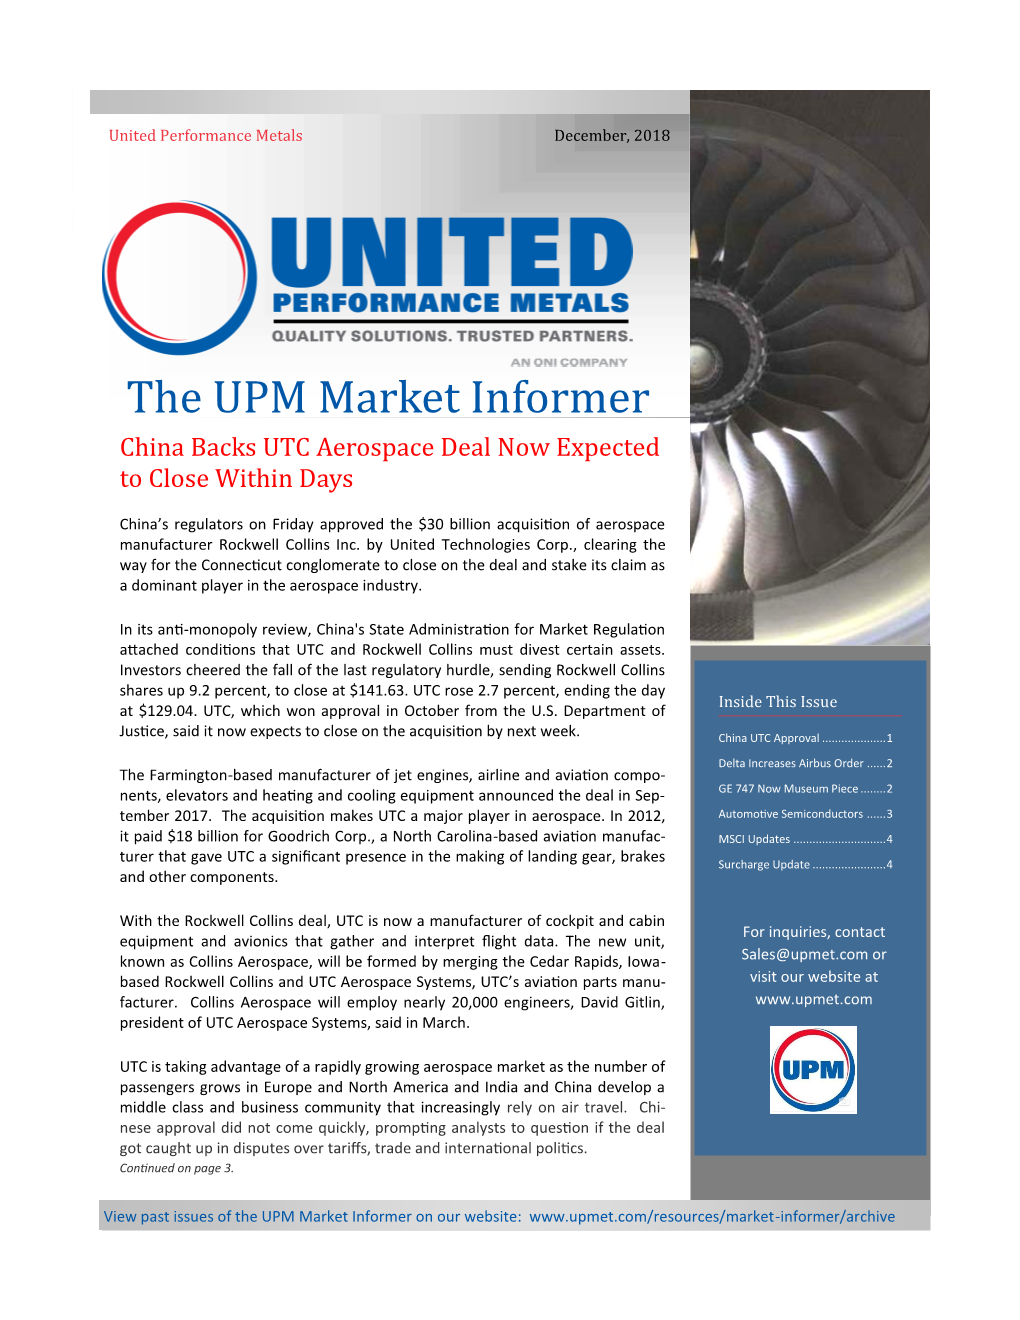 The UPM Market Informer China Backs UTC Aerospace Deal Now Expected to Close Within Days